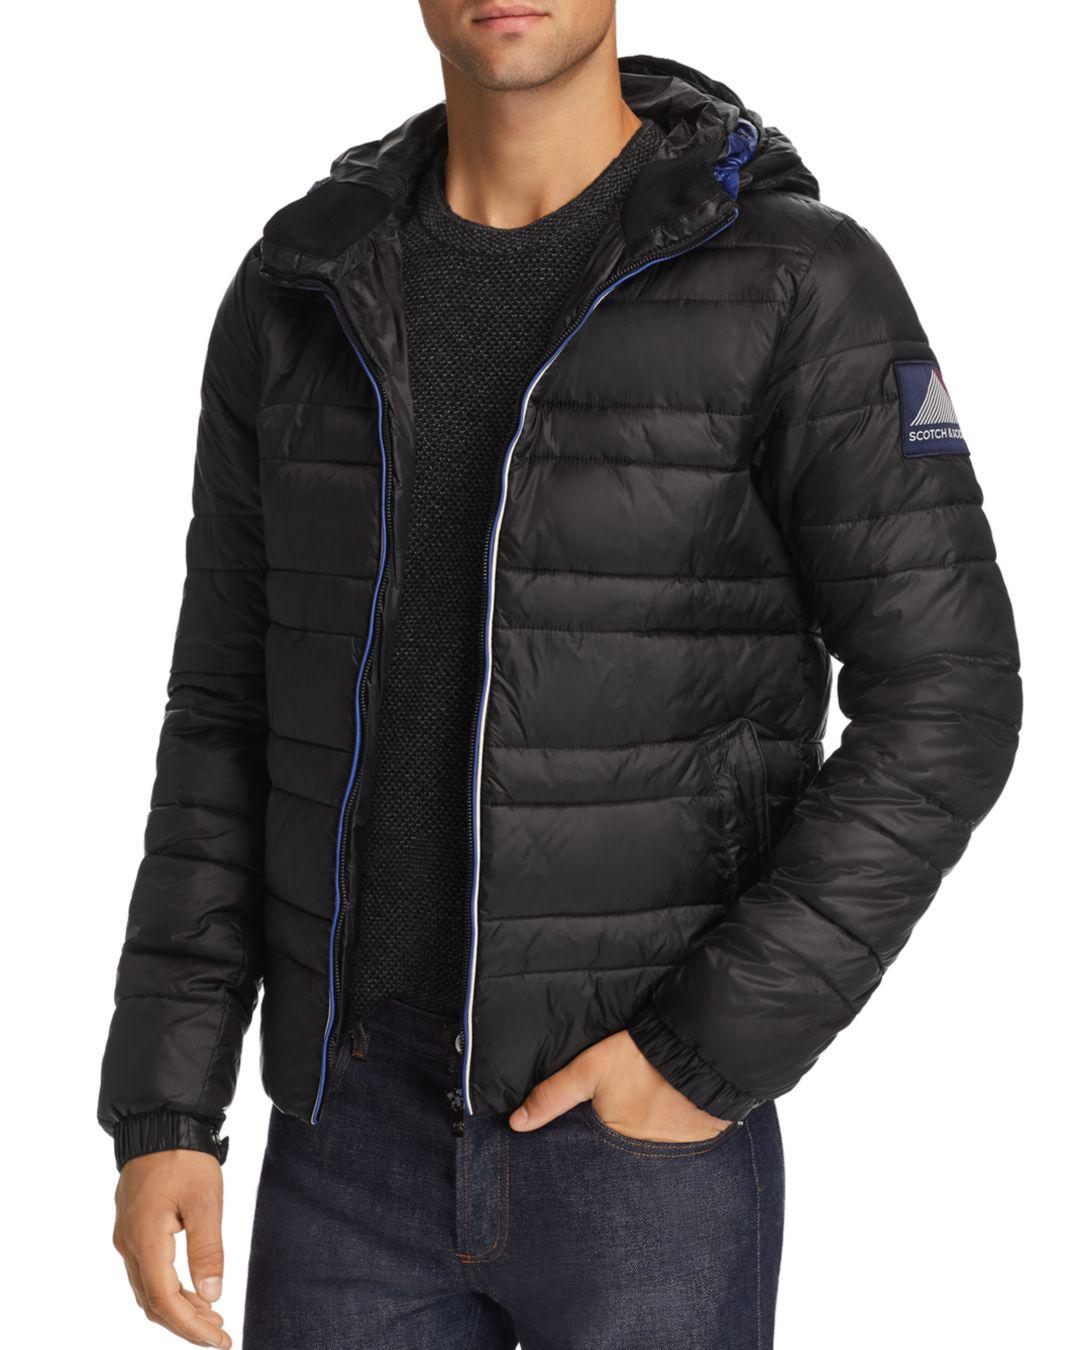 Scotch & Soda Quilted Primaloft® Puffer Jacket in Black for Men - Lyst